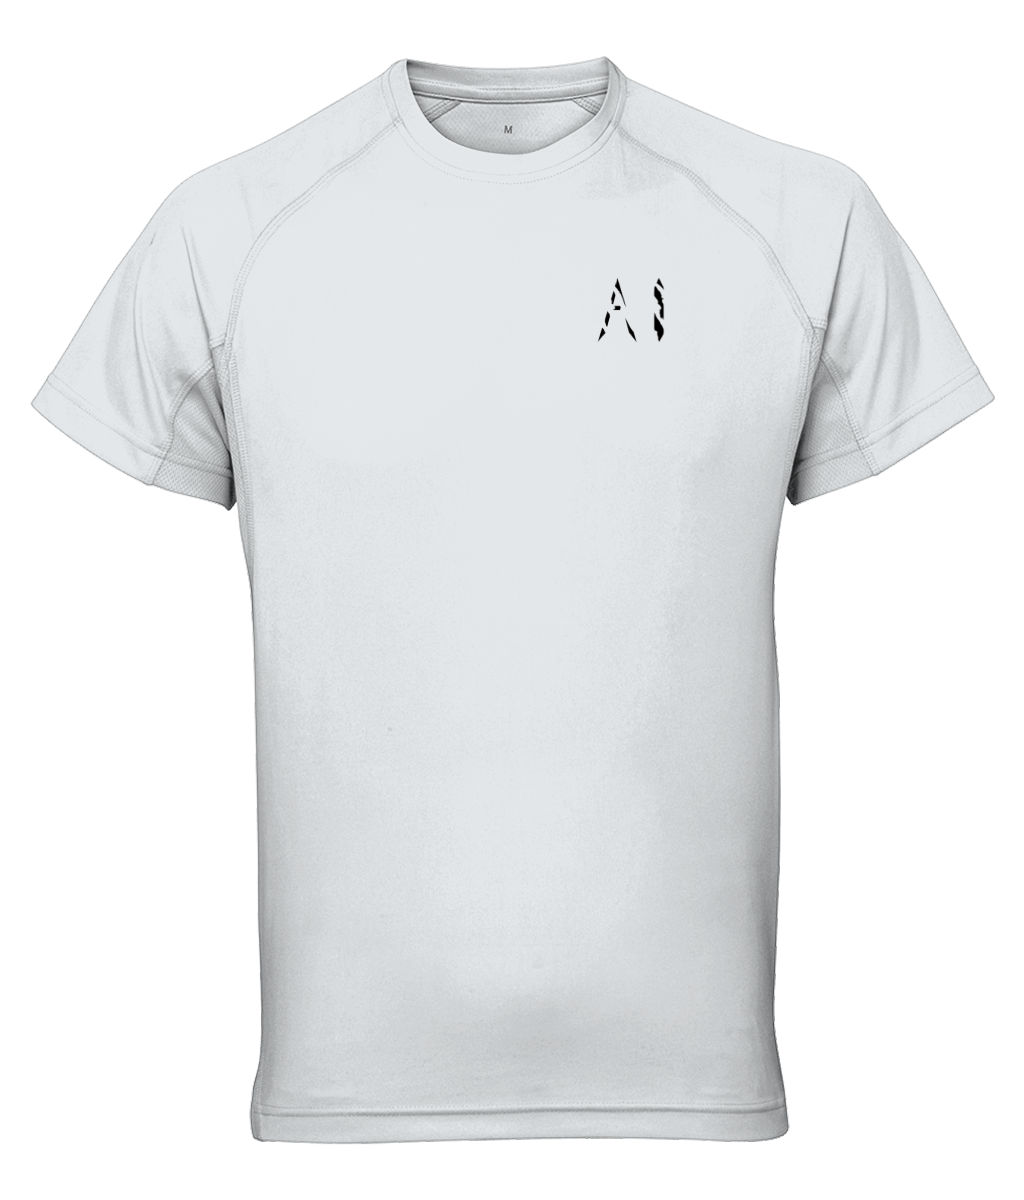 Mens light grey Athletic Performance Top with black AI logo on the left chest